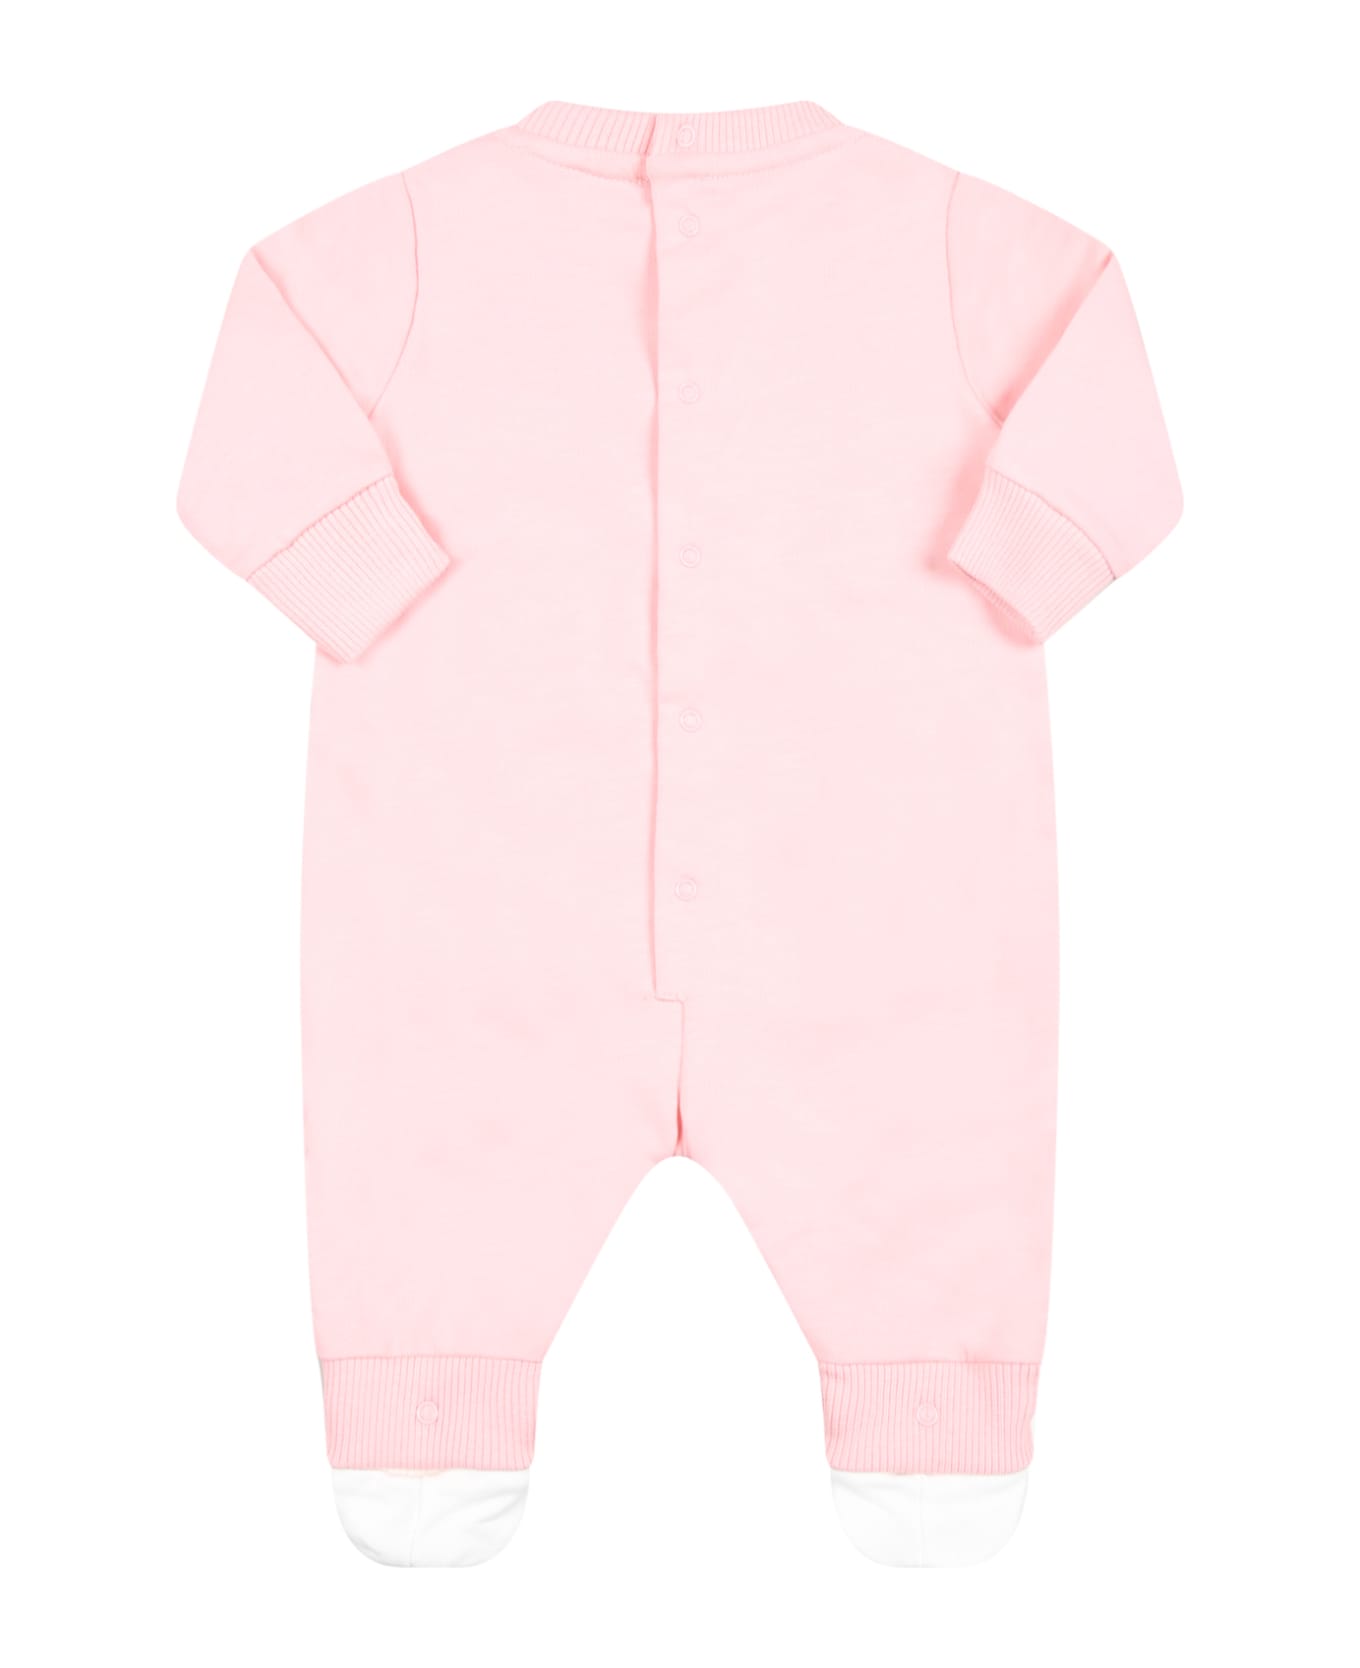 Moschino Pink Big For Baby Girl With Teddy Bear - Pink